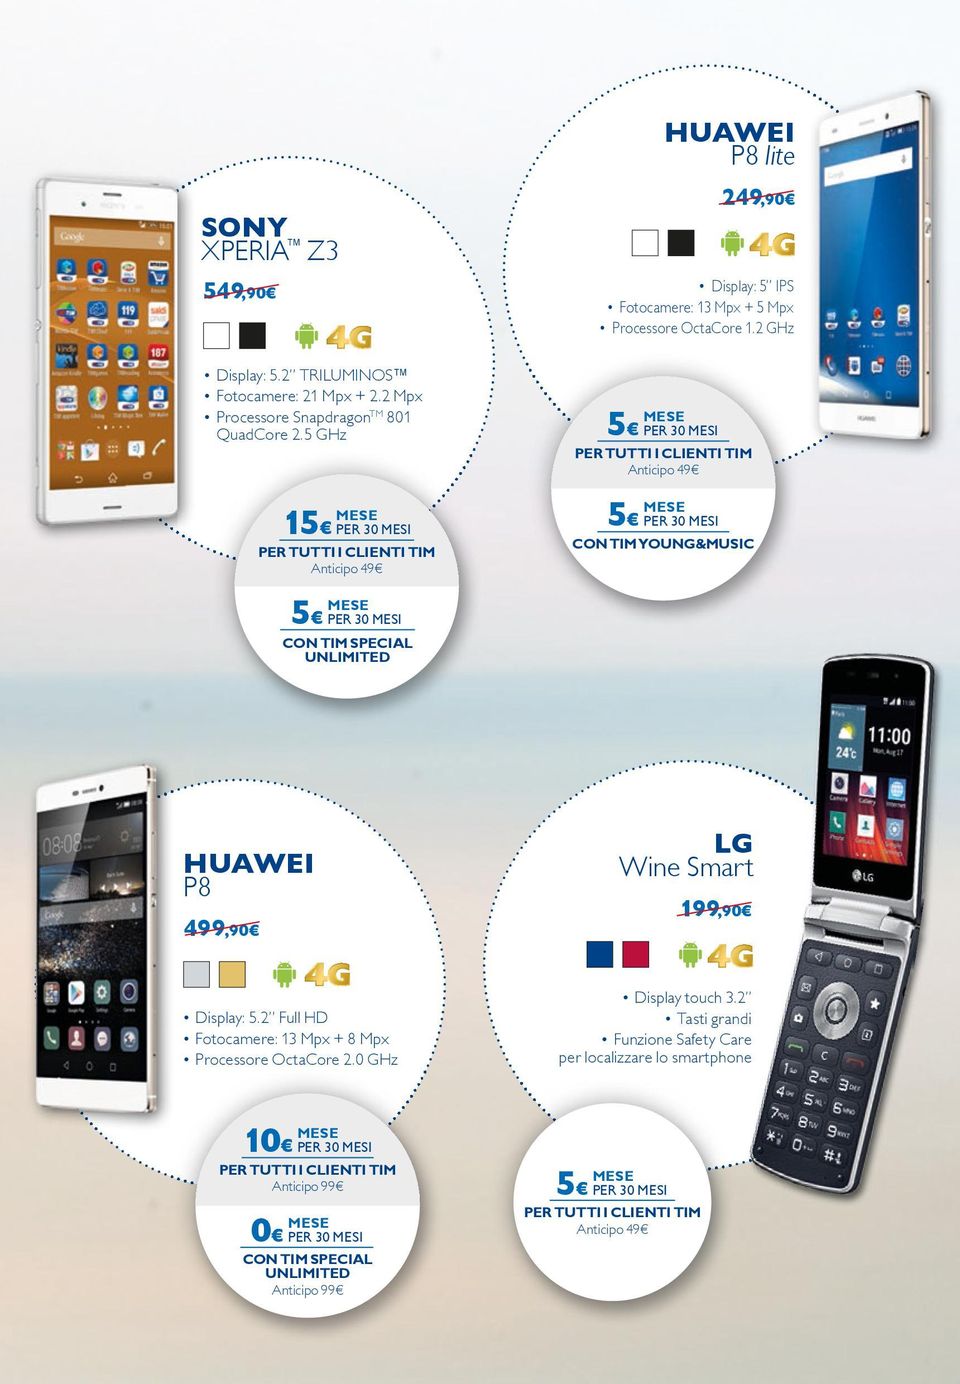 5 GHz 1 CON TIM YOUNG&MUSIC CON TIM SPECIAL UNLIMITED HUAWEI P8 499,90 LG Wine Smart 199,90 Display: 5.